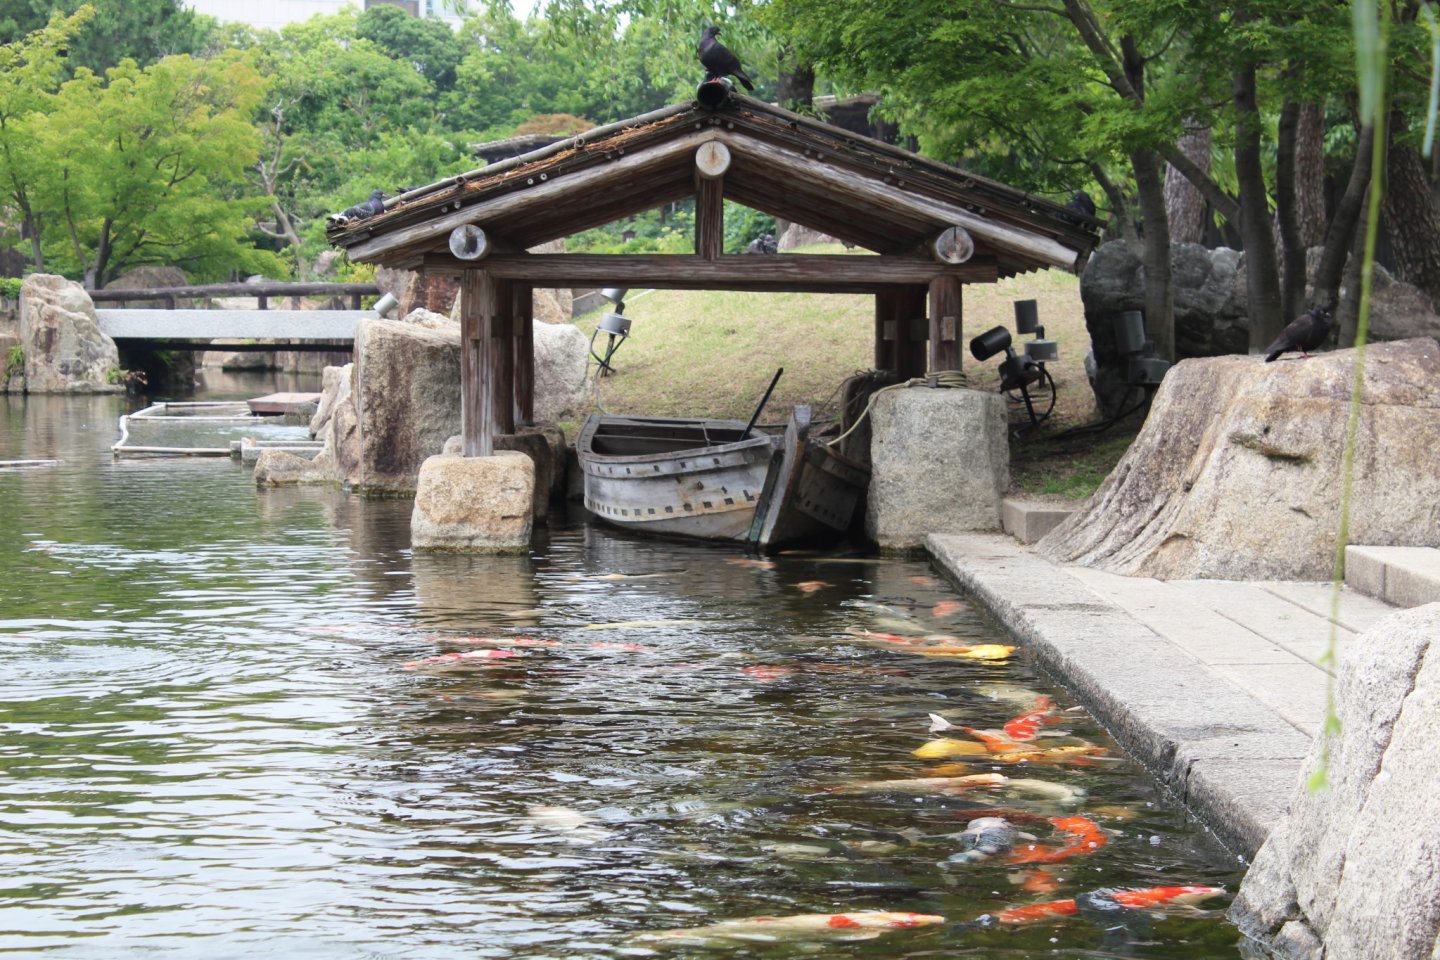 An alluring setting to complement an array of extremely colorful koi fish